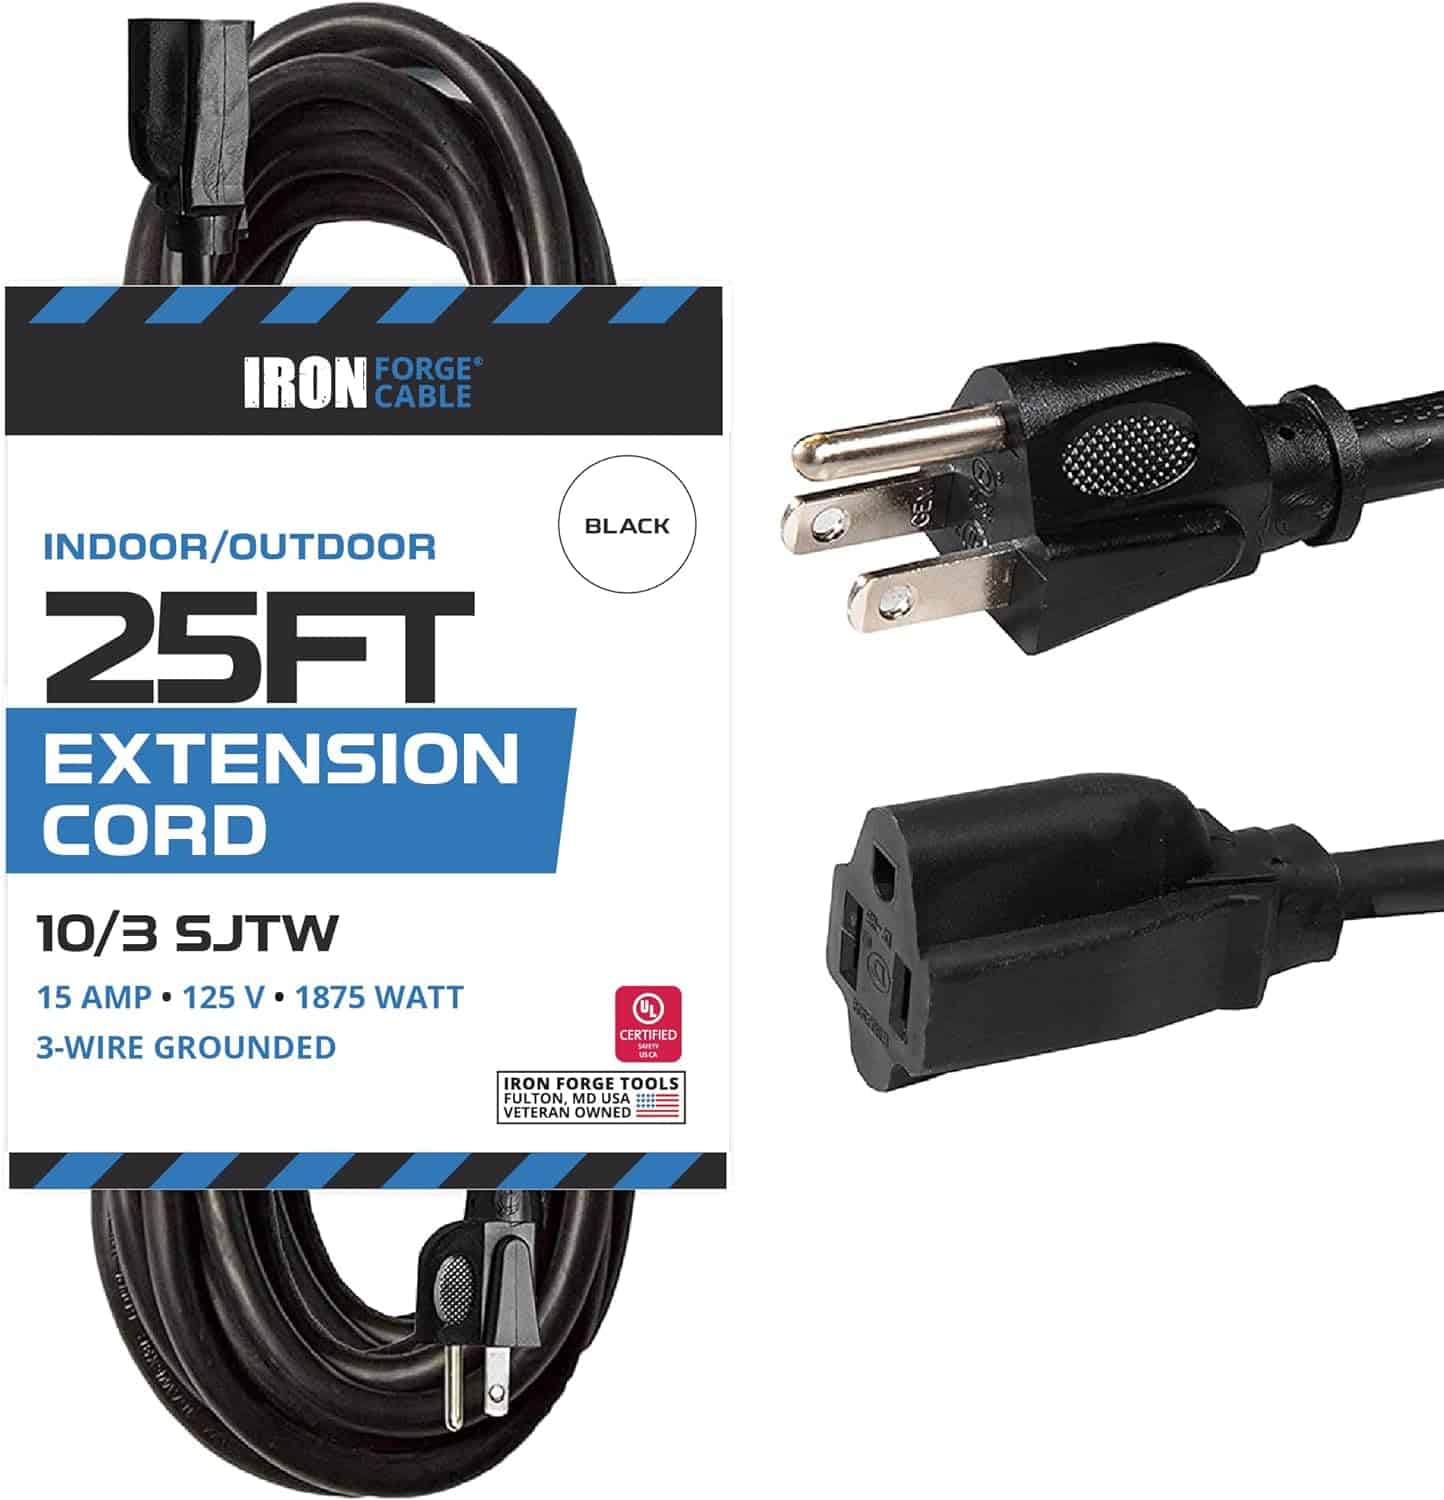 Iron Forge 10 Gauge Extension Cord 25 FT – 15 AMP Extension Cord with 3 Prong 10 AWG Water Resistant Black Outdoor Extension Cord Great for Generator, Compressor, Major Appliances – US Veteran Owned 1